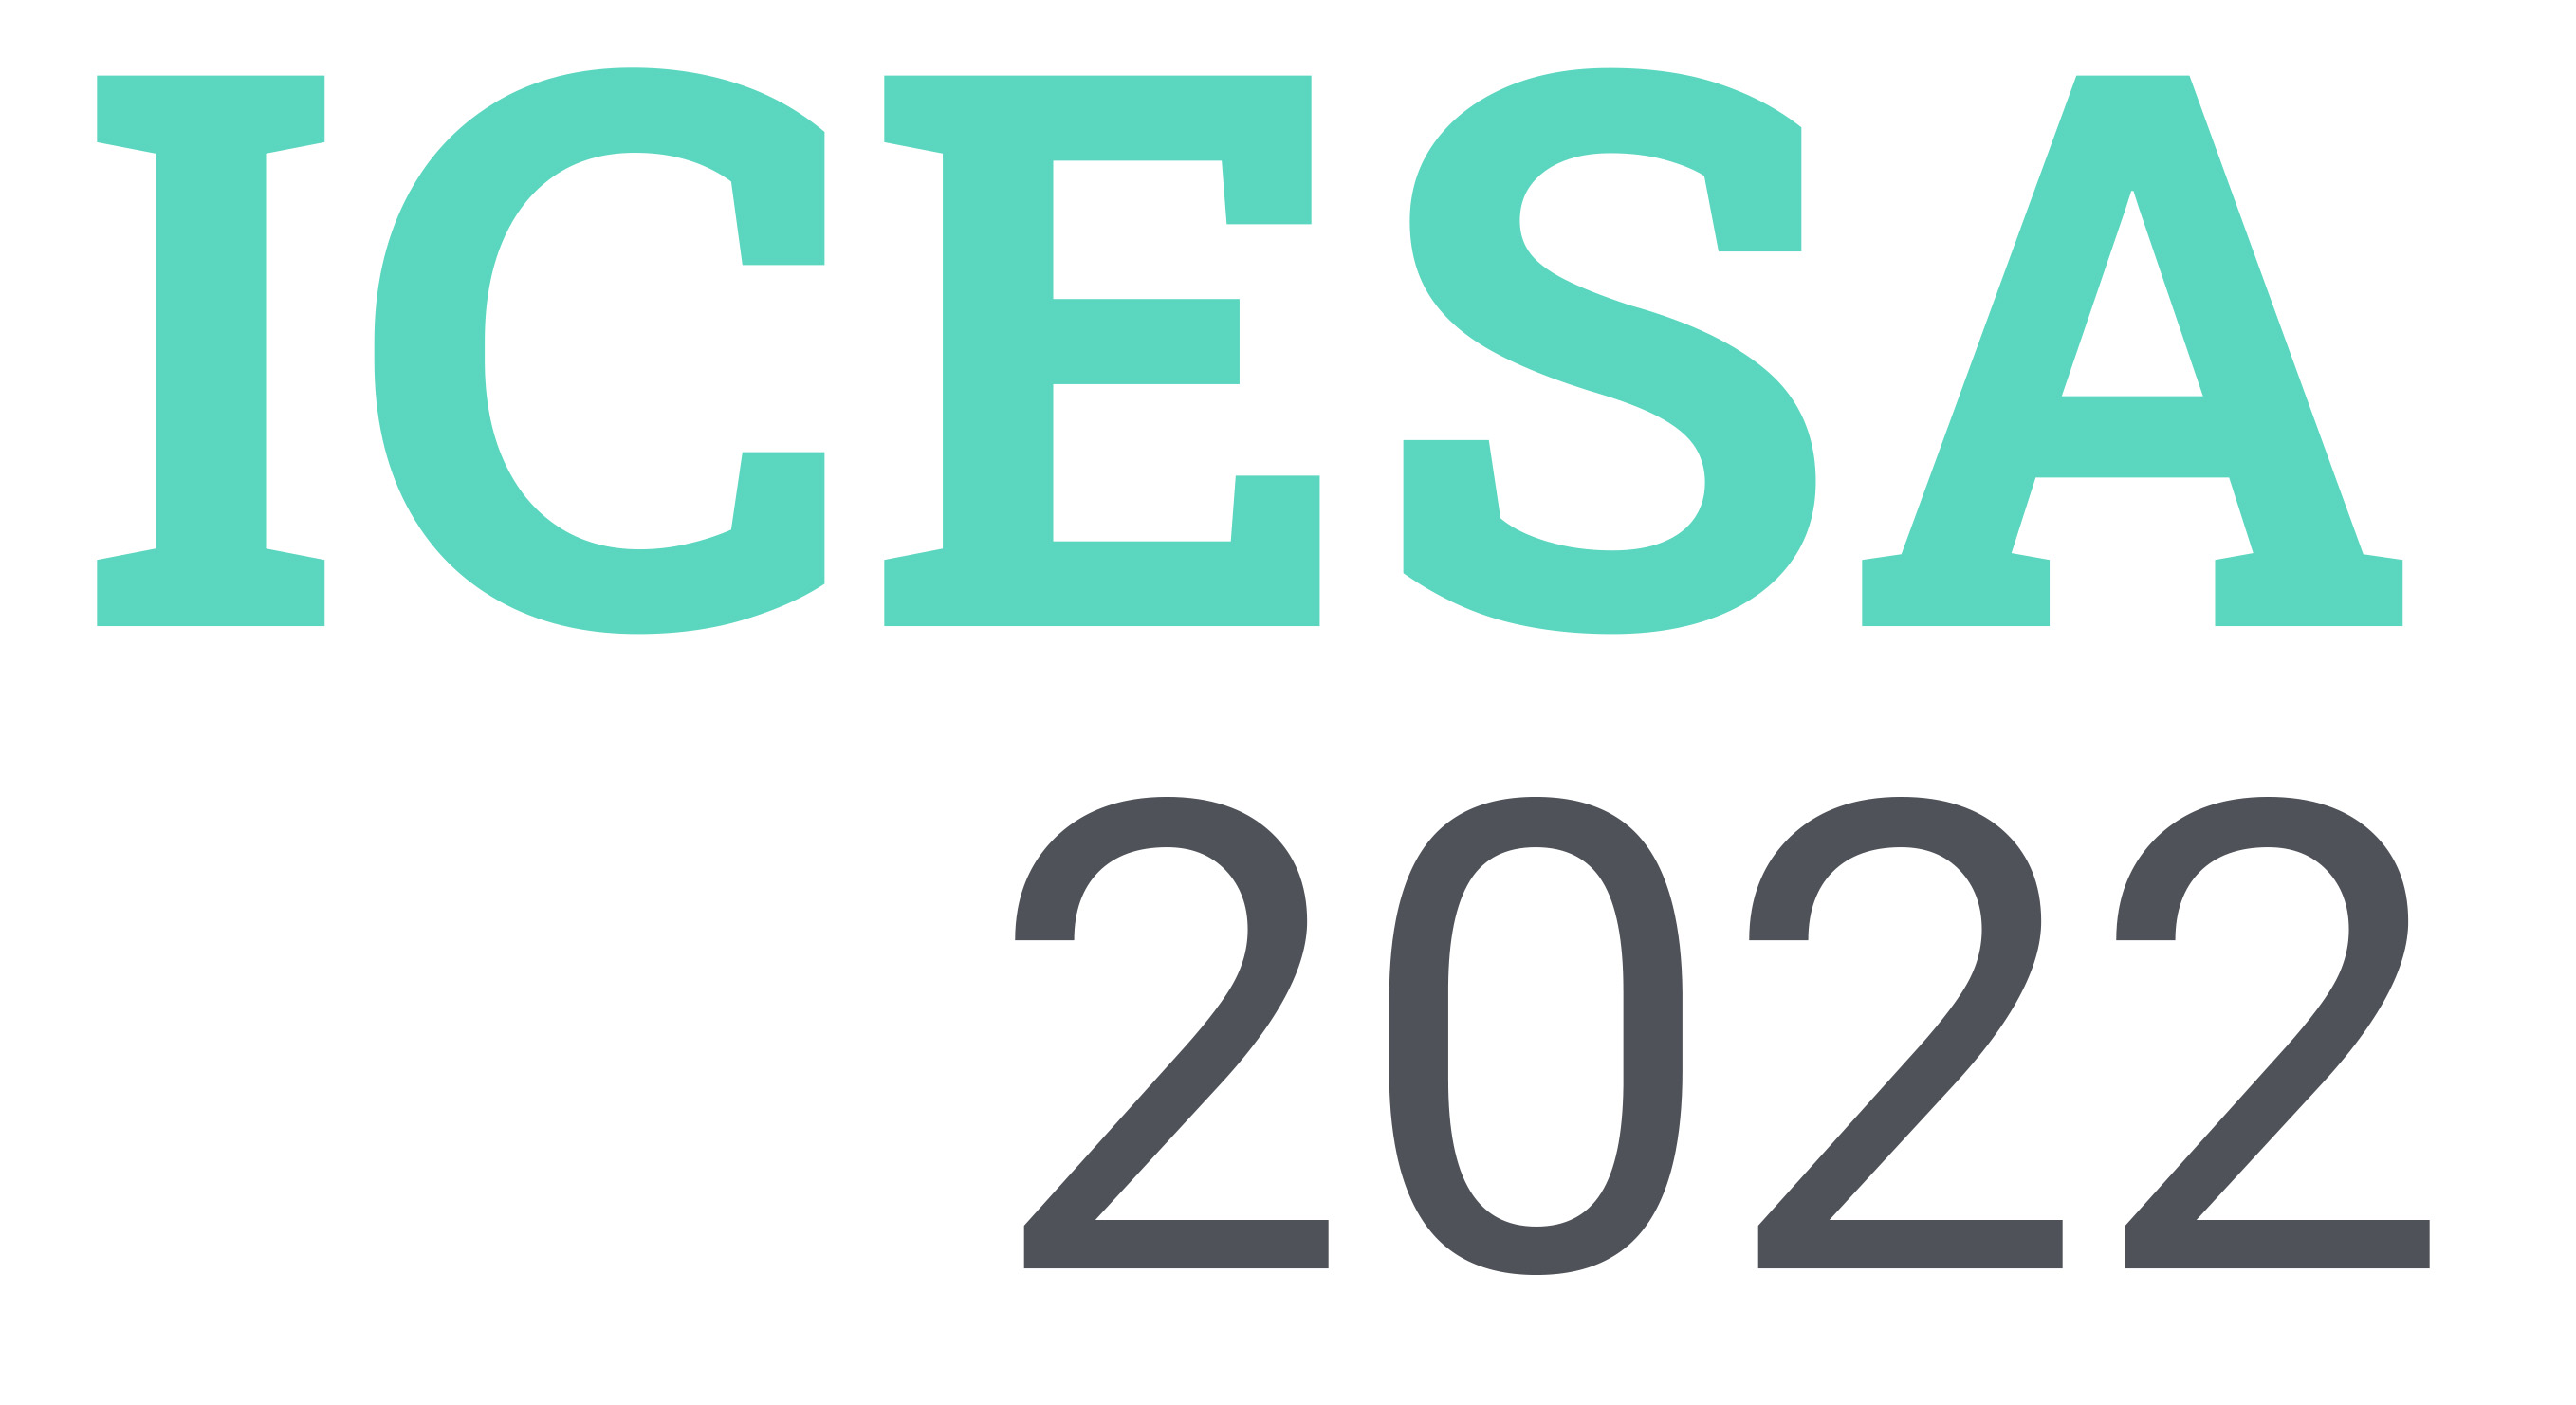 3rd International Conference on Environmental Science and Applications (ICESA’20'20), VIRTUAL CONFERENCE, October 24 - 26, 2022